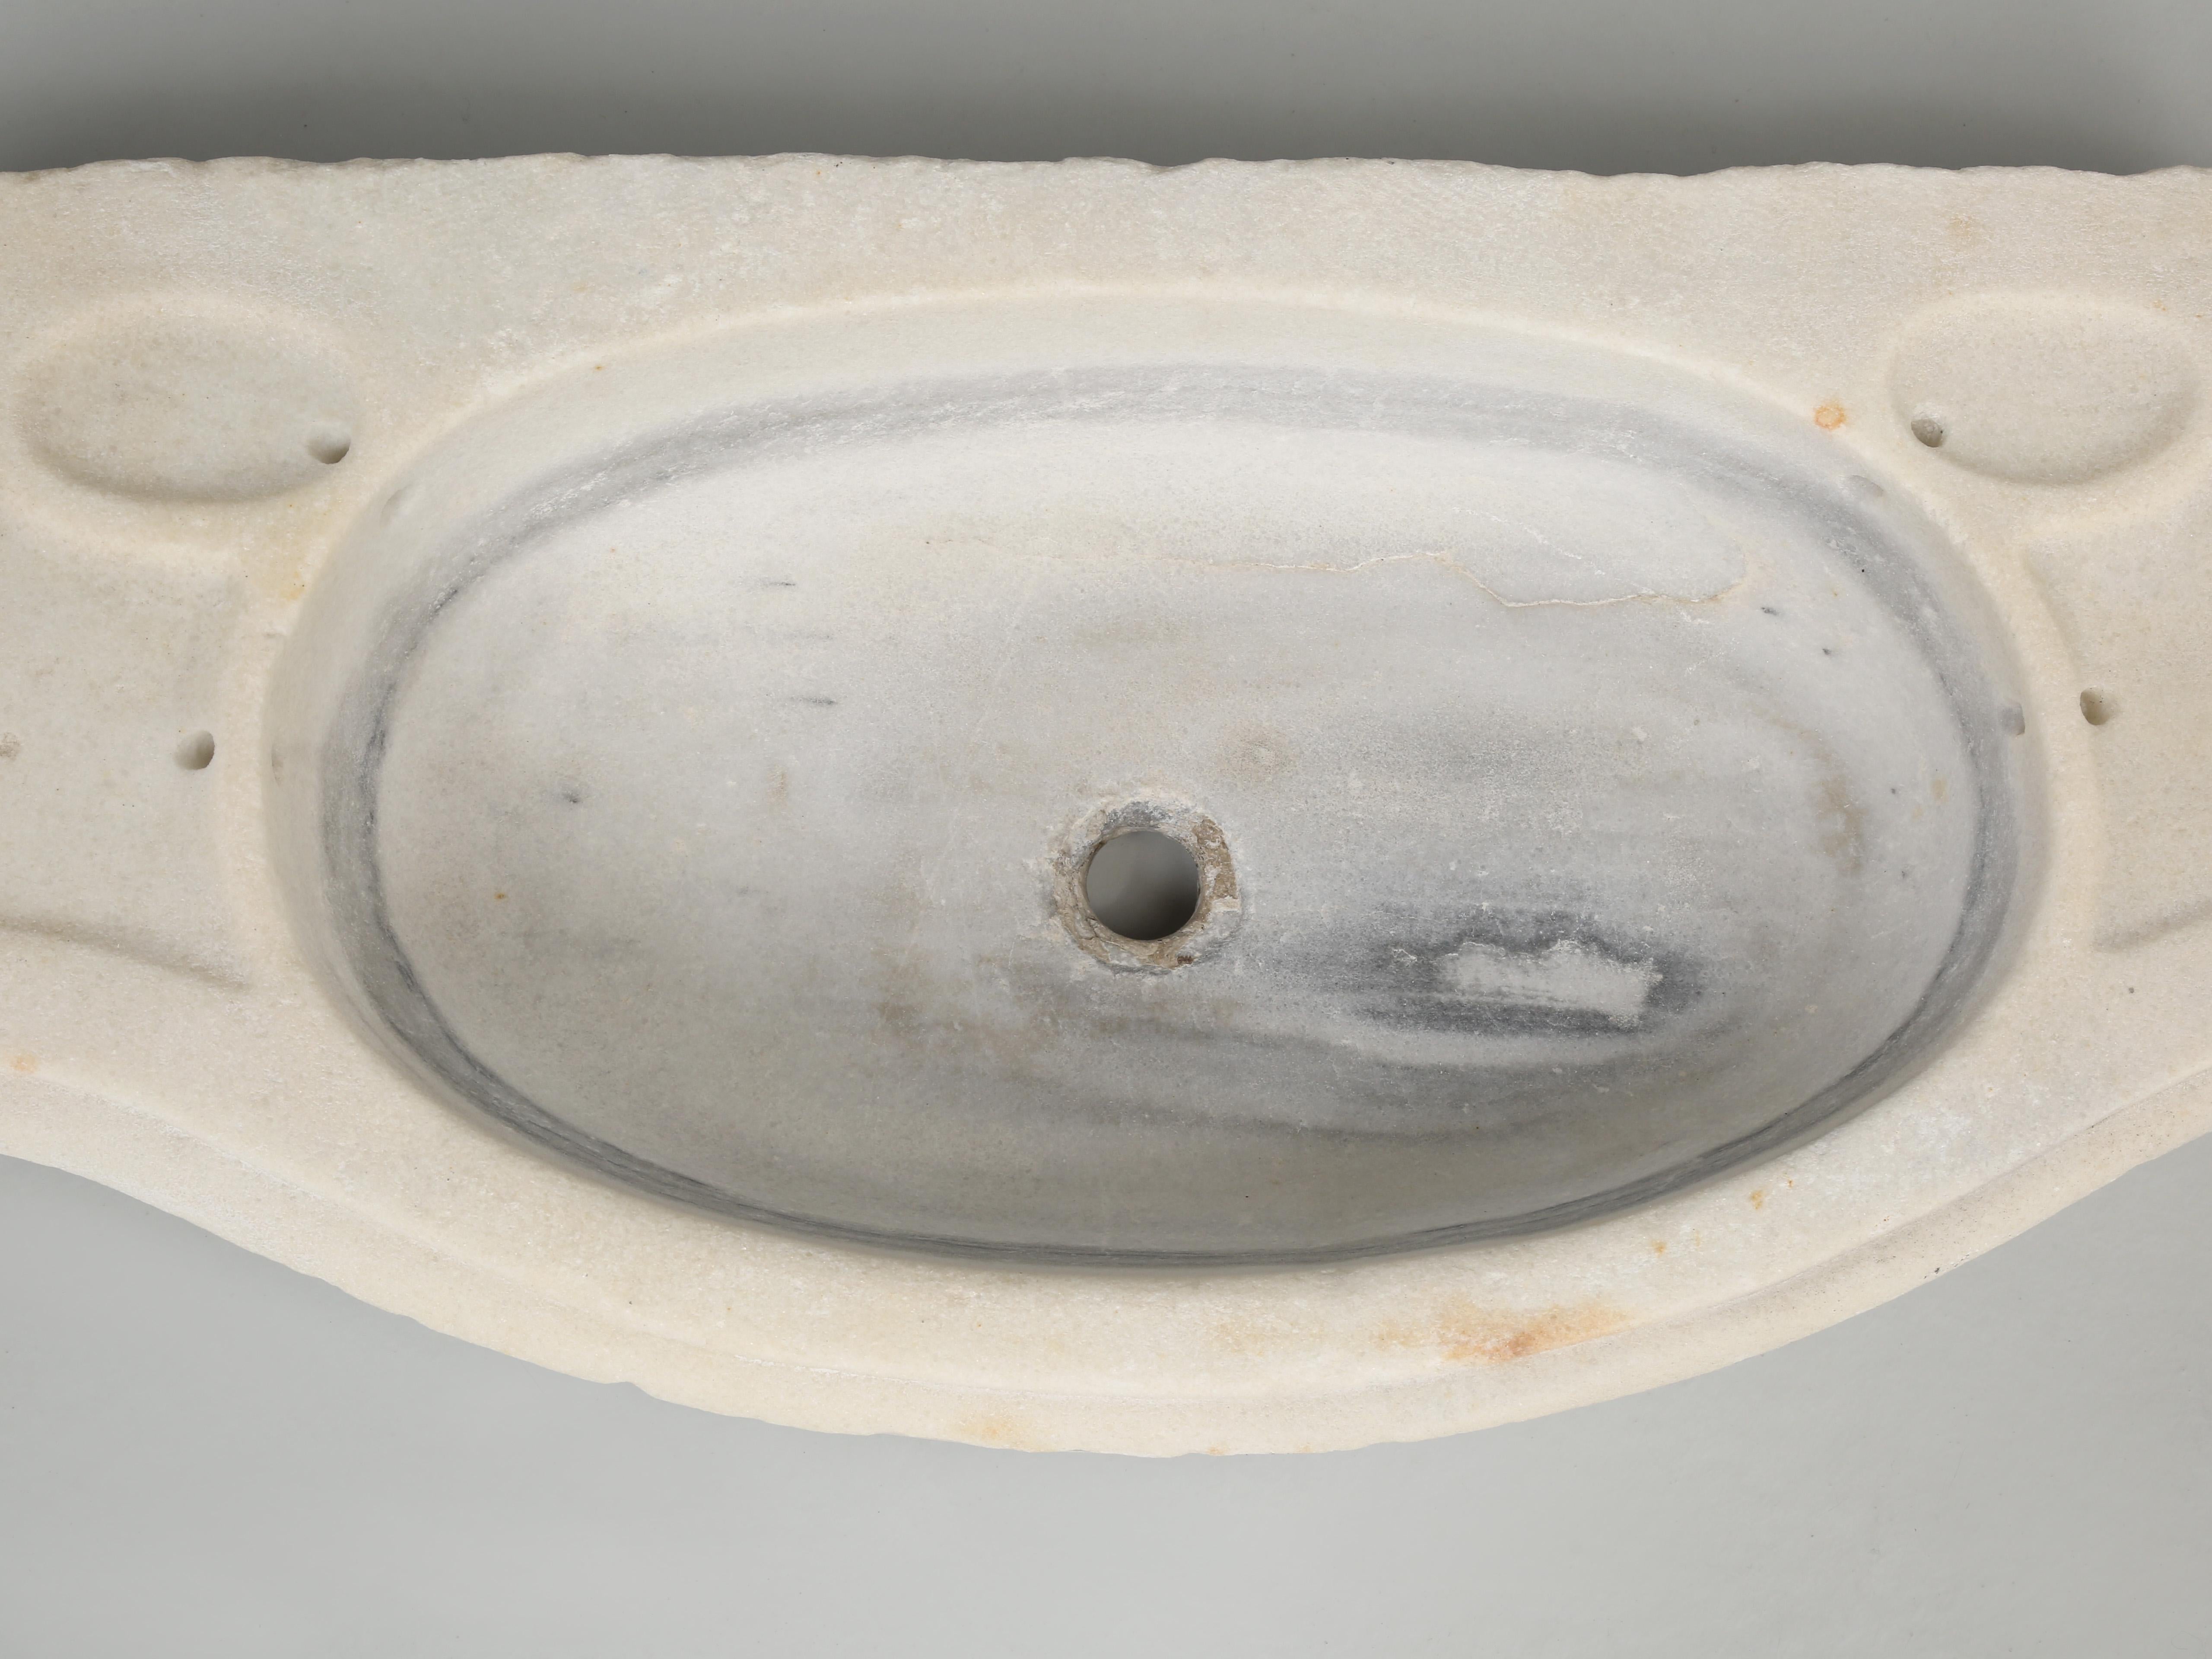 Late 19th Century Antique French Carrara Marble Sink Idea for Small Powder Room, c1800's